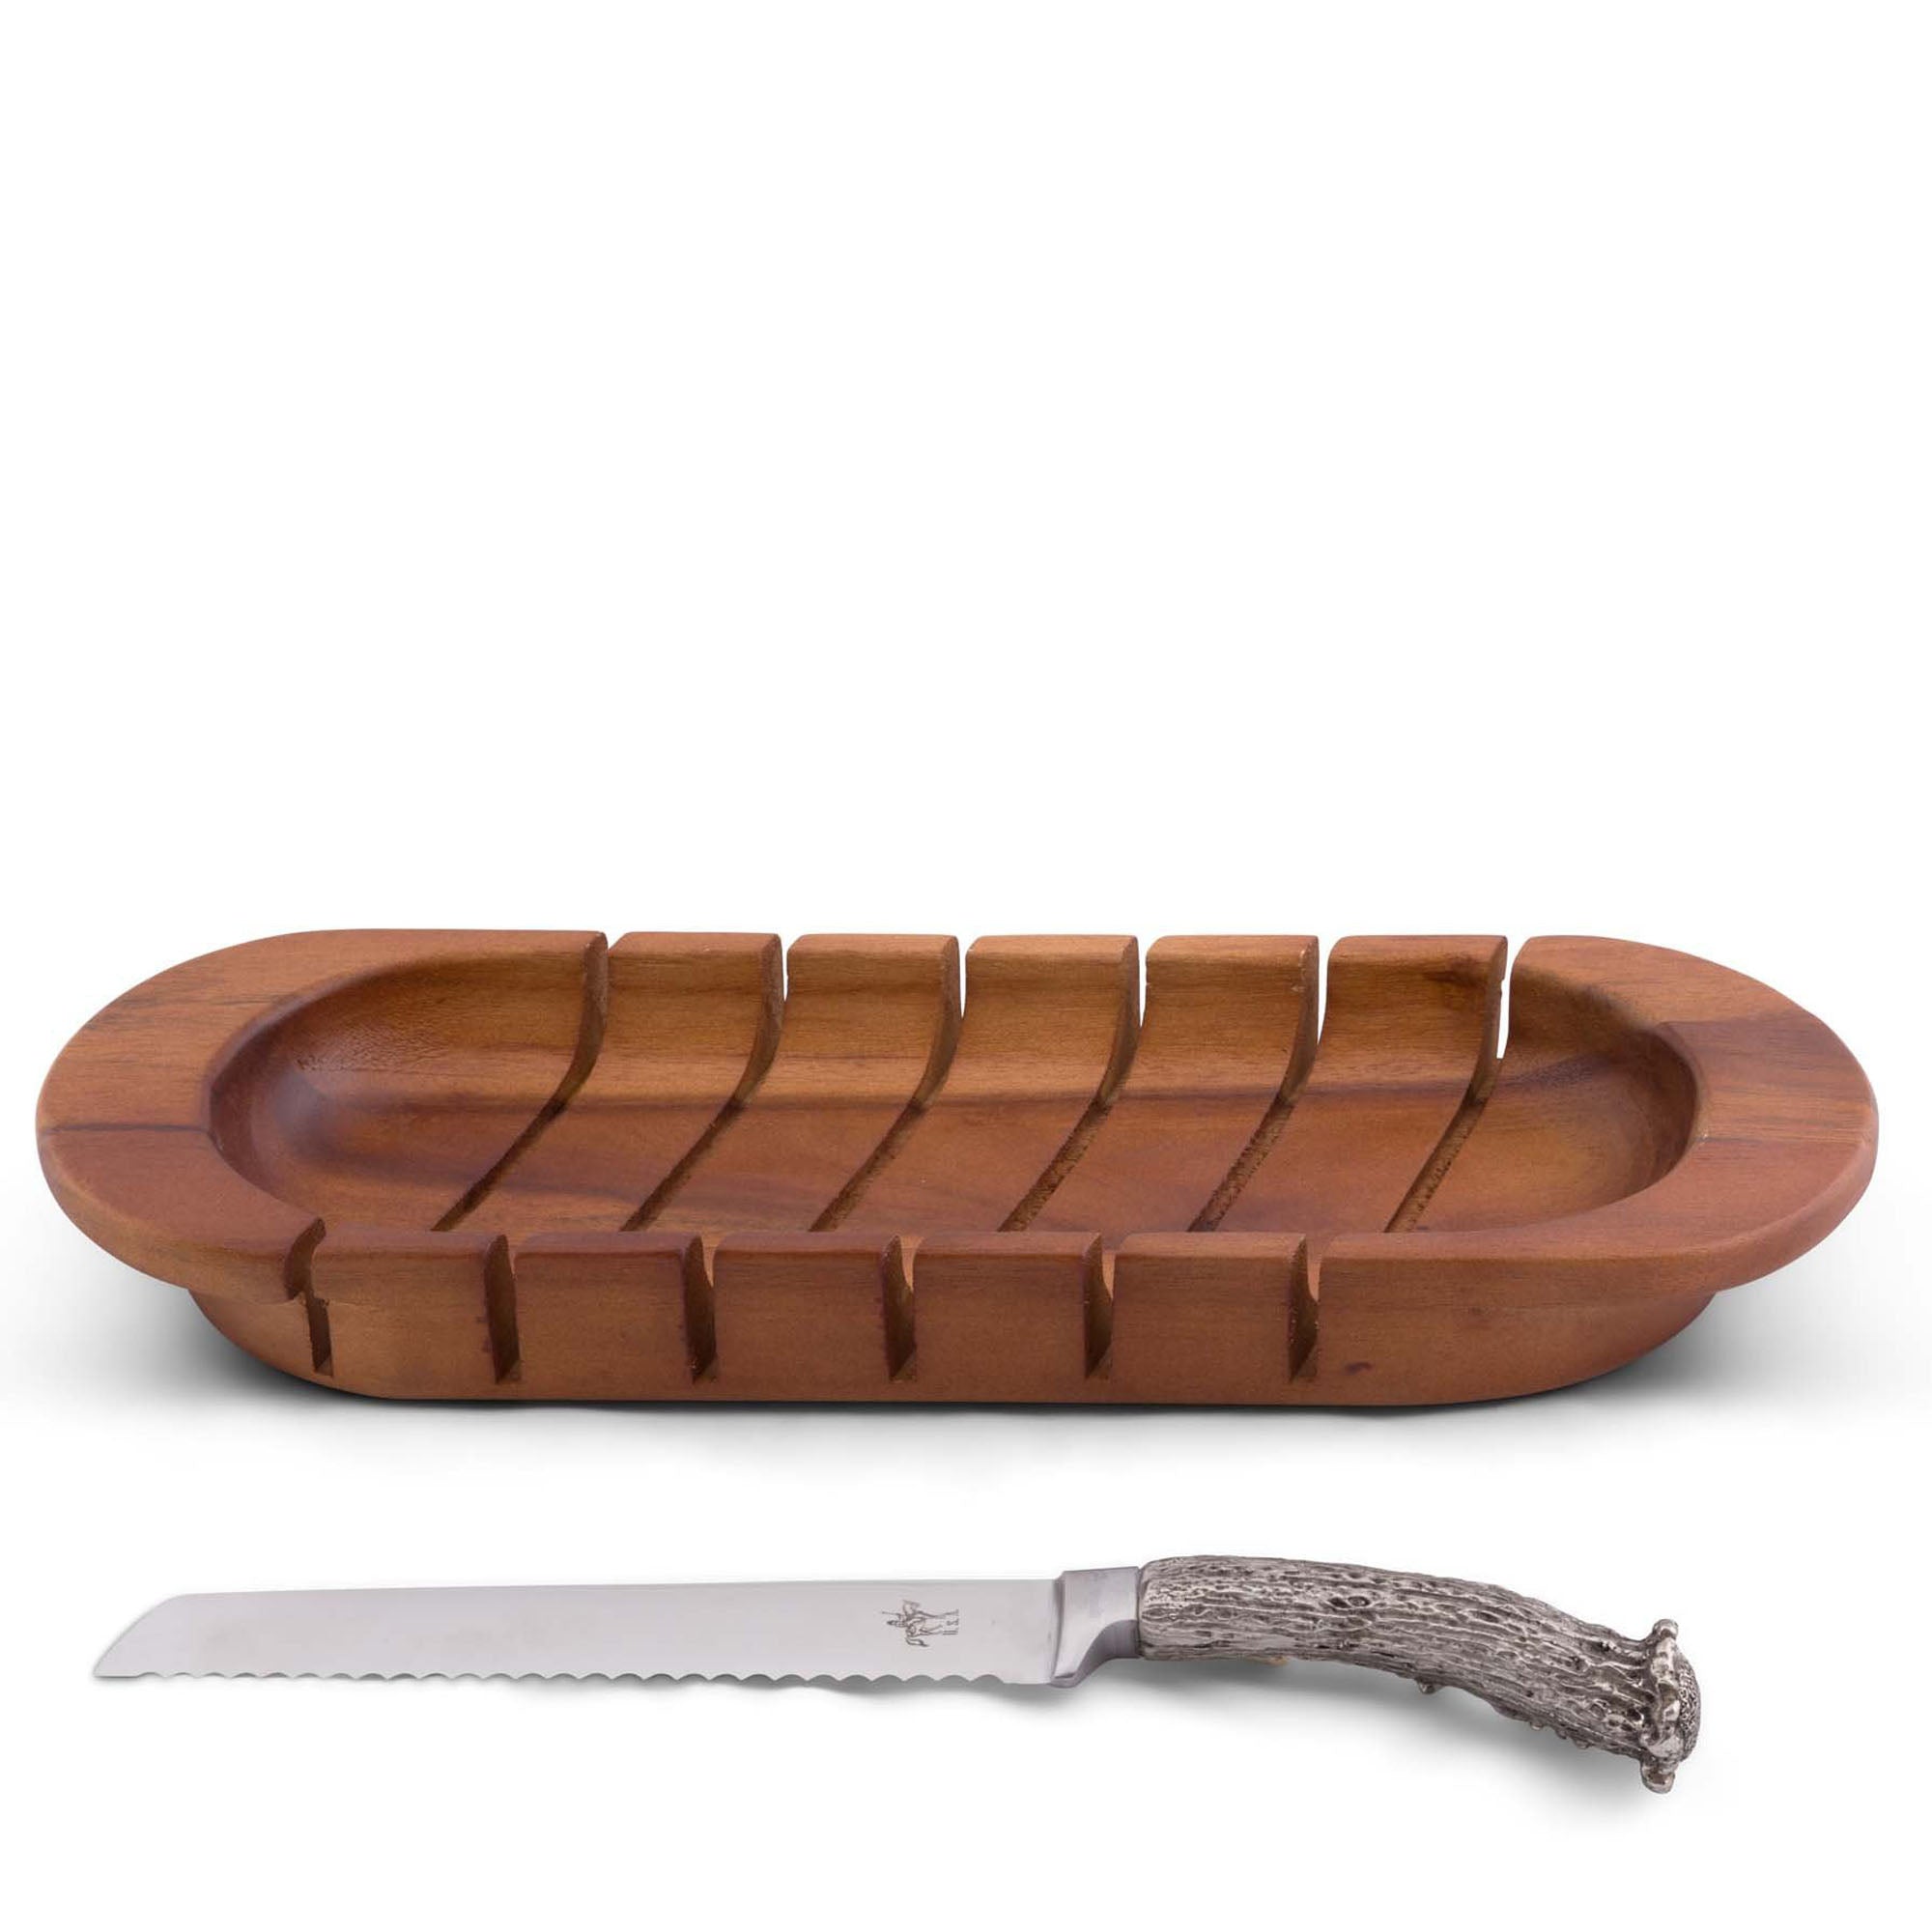 Vagabond House Oval Bread Board with Antler Knife Product Image